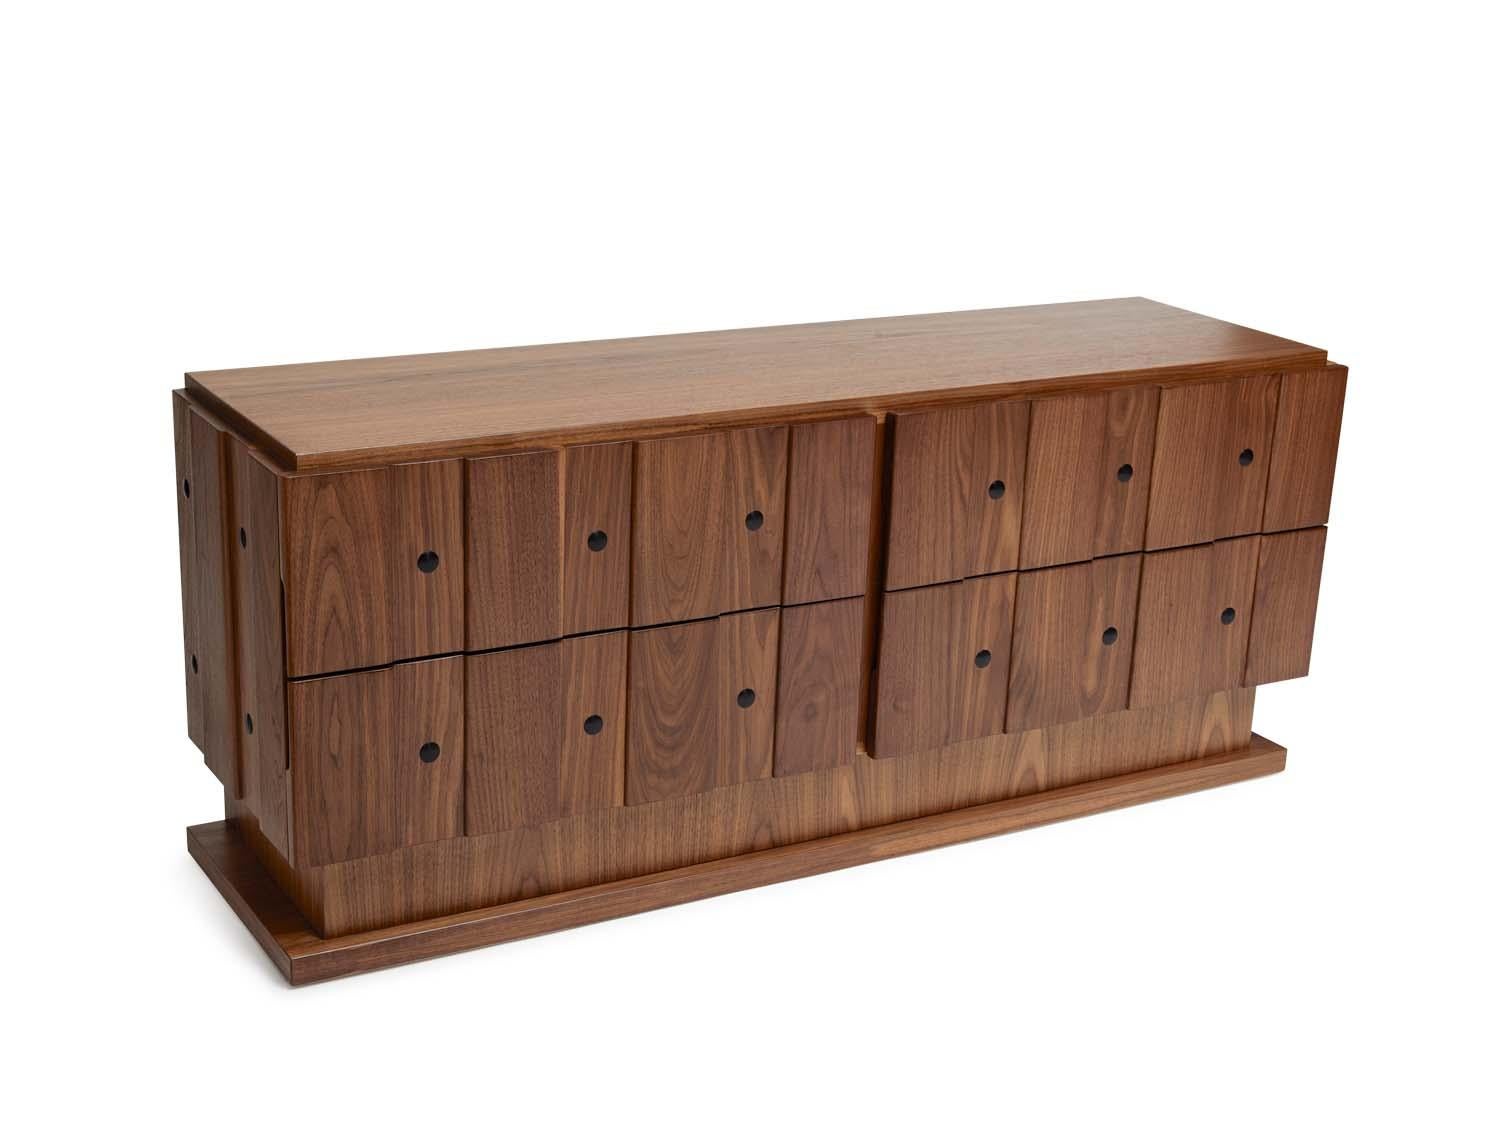 The Ojai Dresser features four board and batten drawers with iron details. Available in 60